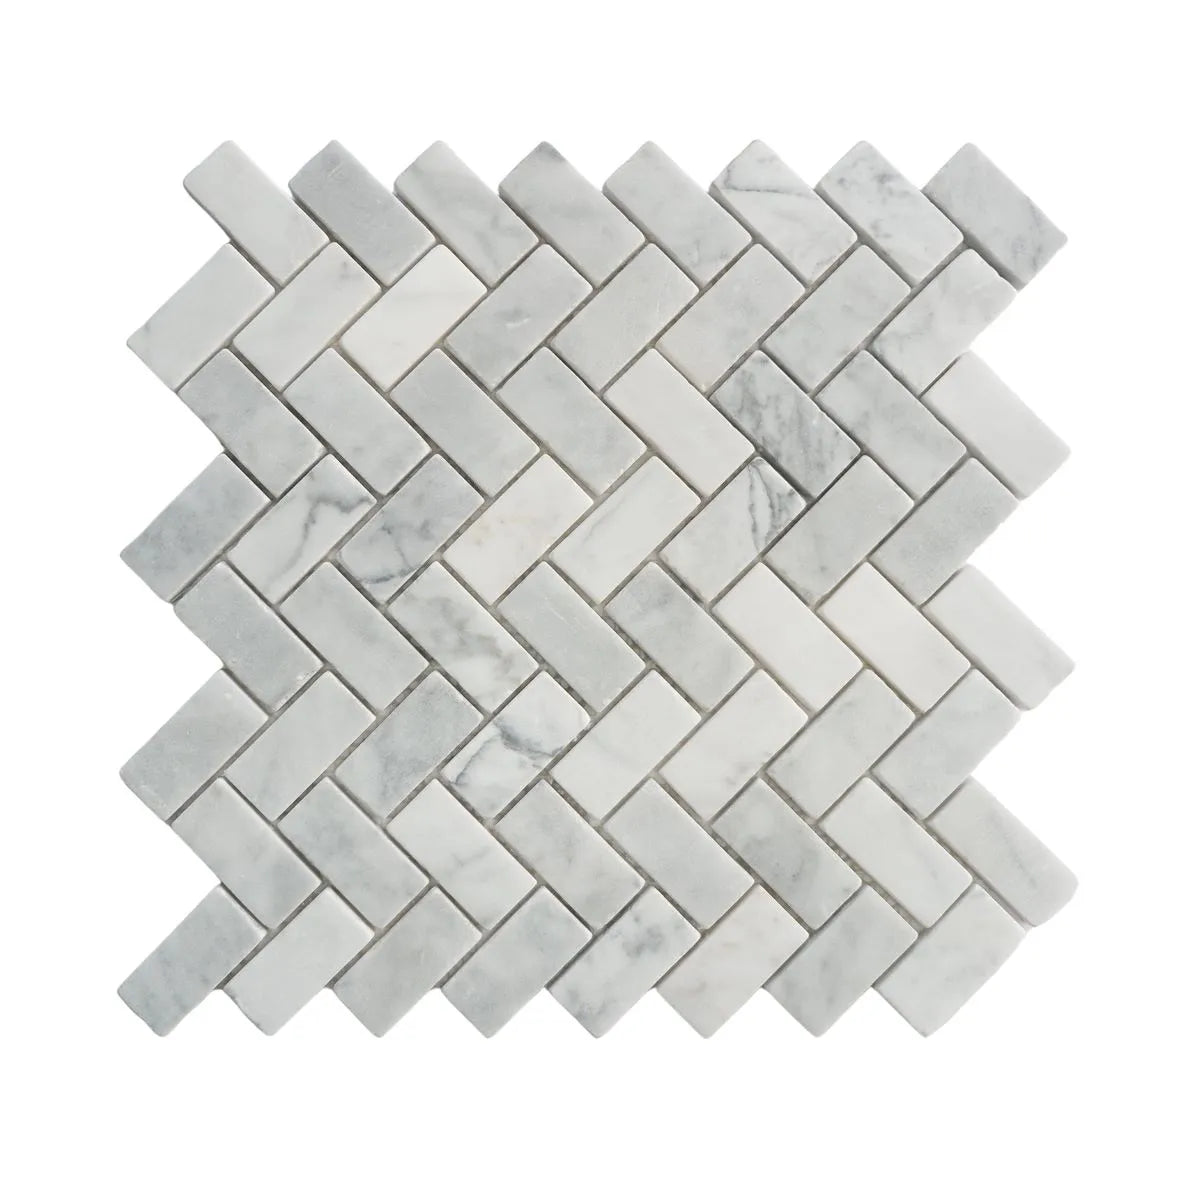 Heringbone carrara tile sample without grout